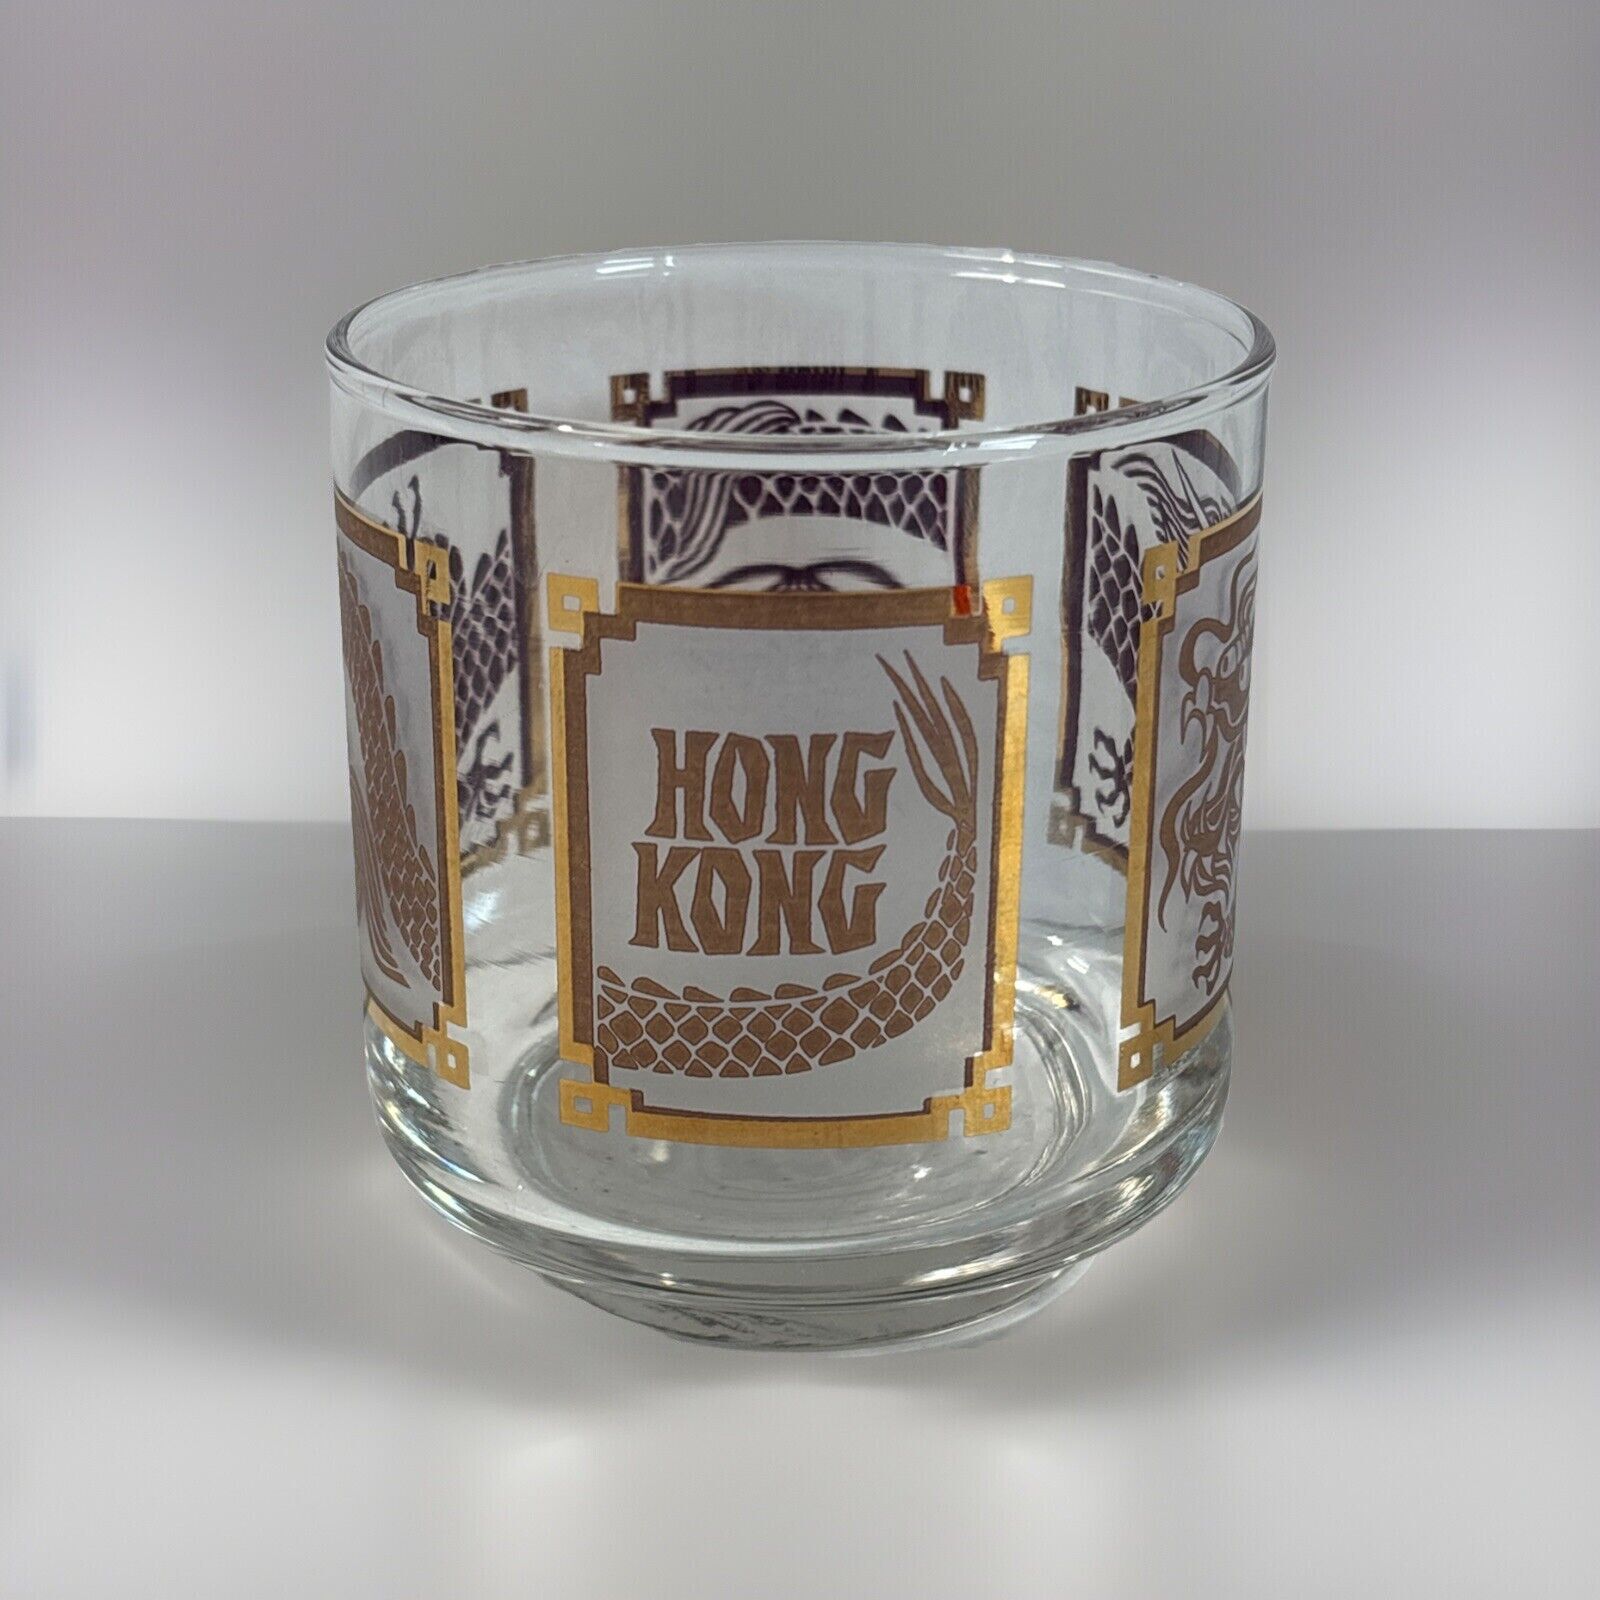 Vintage TWA Airlines The world of Hong Kong Drinking glass tumbler